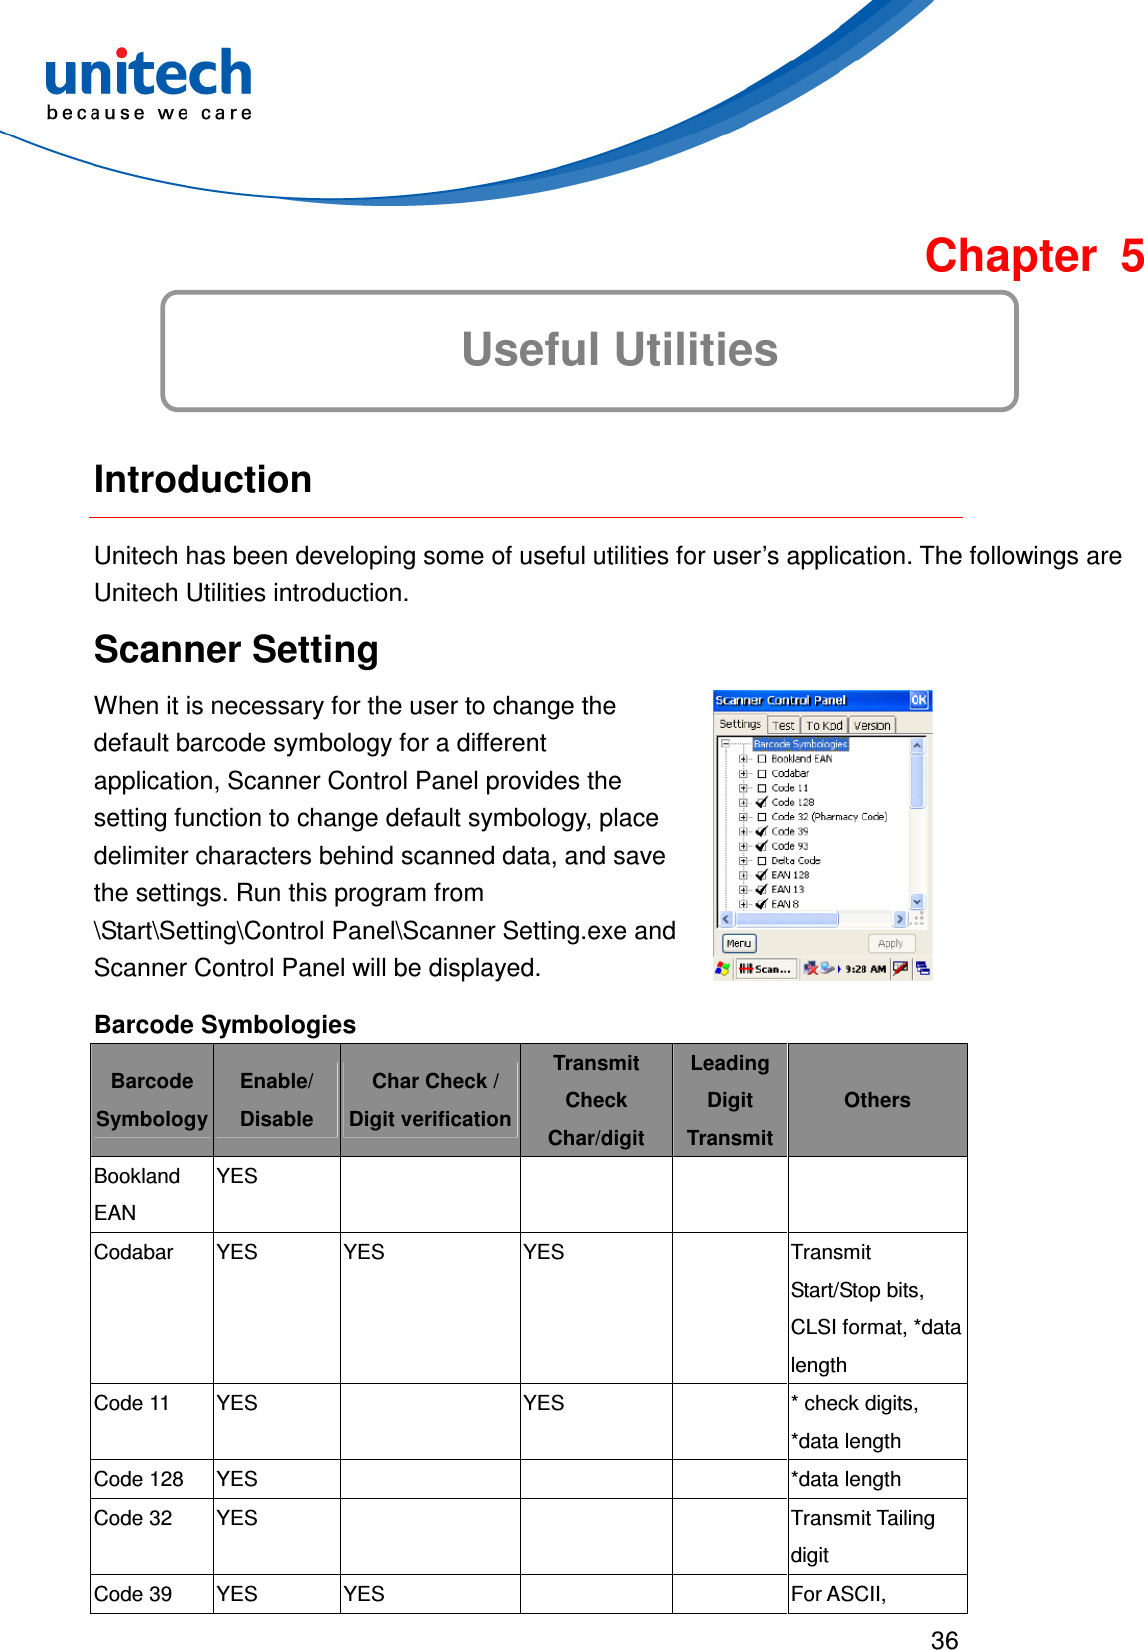  36   Chapter 5 Useful Utilities  Introduction Unitech has been developing some of useful utilities for user’s application. The followings are Unitech Utilities introduction. Scanner Setting When it is necessary for the user to change the default barcode symbology for a different application, Scanner Control Panel provides the setting function to change default symbology, place delimiter characters behind scanned data, and save the settings. Run this program from \Start\Setting\Control Panel\Scanner Setting.exe and Scanner Control Panel will be displayed.   Barcode Symbologies Barcode Symbology Enable/ Disable   Char Check / Digit verification Transmit Check Char/digit Leading Digit Transmit Others Bookland EAN YES         Codabar  YES  YES  YES    Transmit Start/Stop bits, CLSI format, *data length Code 11  YES    YES    * check digits, *data length Code 128  YES        *data length Code 32  YES        Transmit Tailing digit Code 39  YES  YES      For ASCII, 